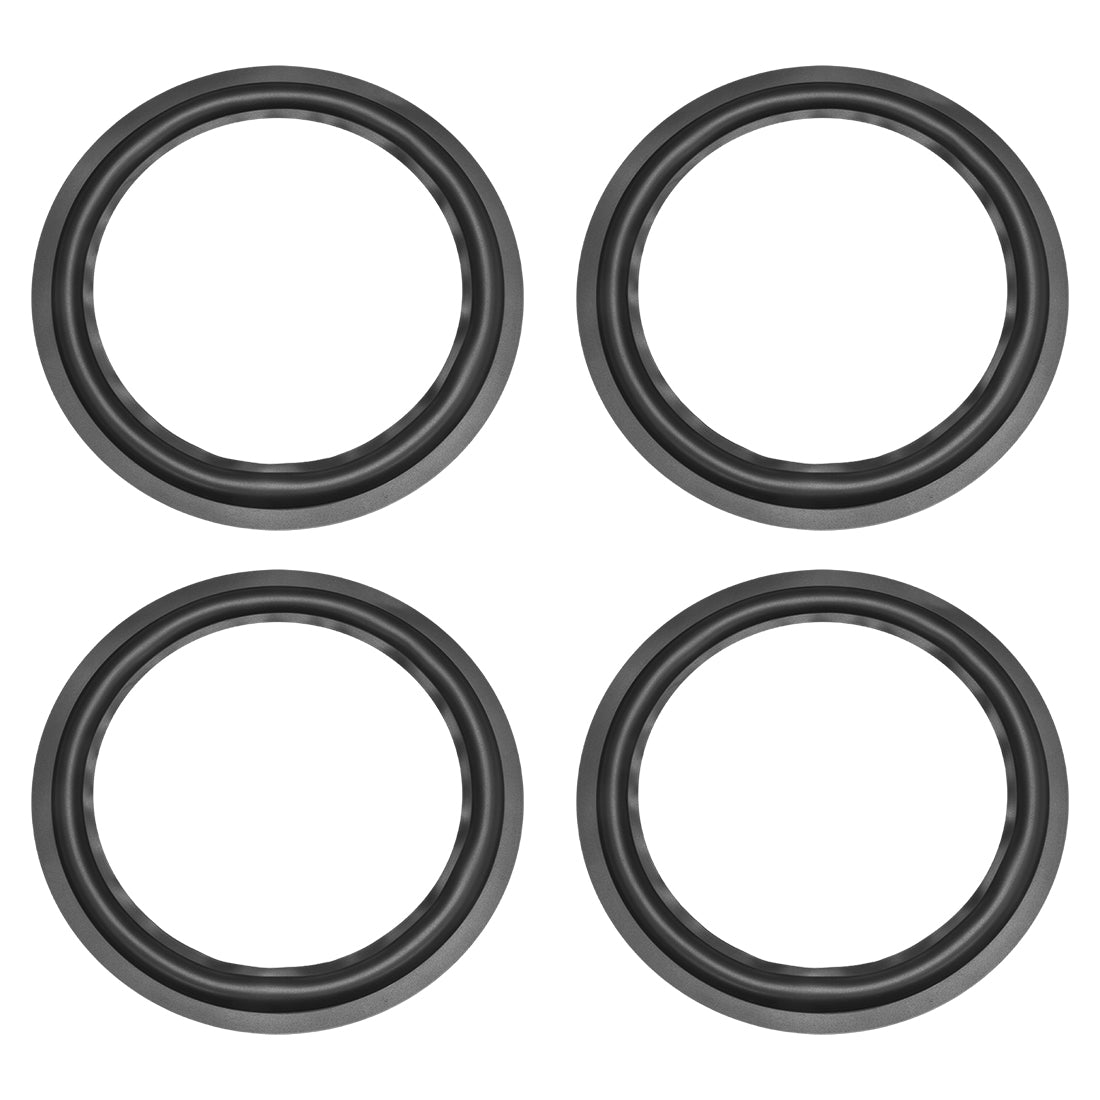 uxcell Uxcell 12" 12inch Speaker Rubber Edge Surround Rings Replacement Part for Speaker Repair or DIY 4pcs